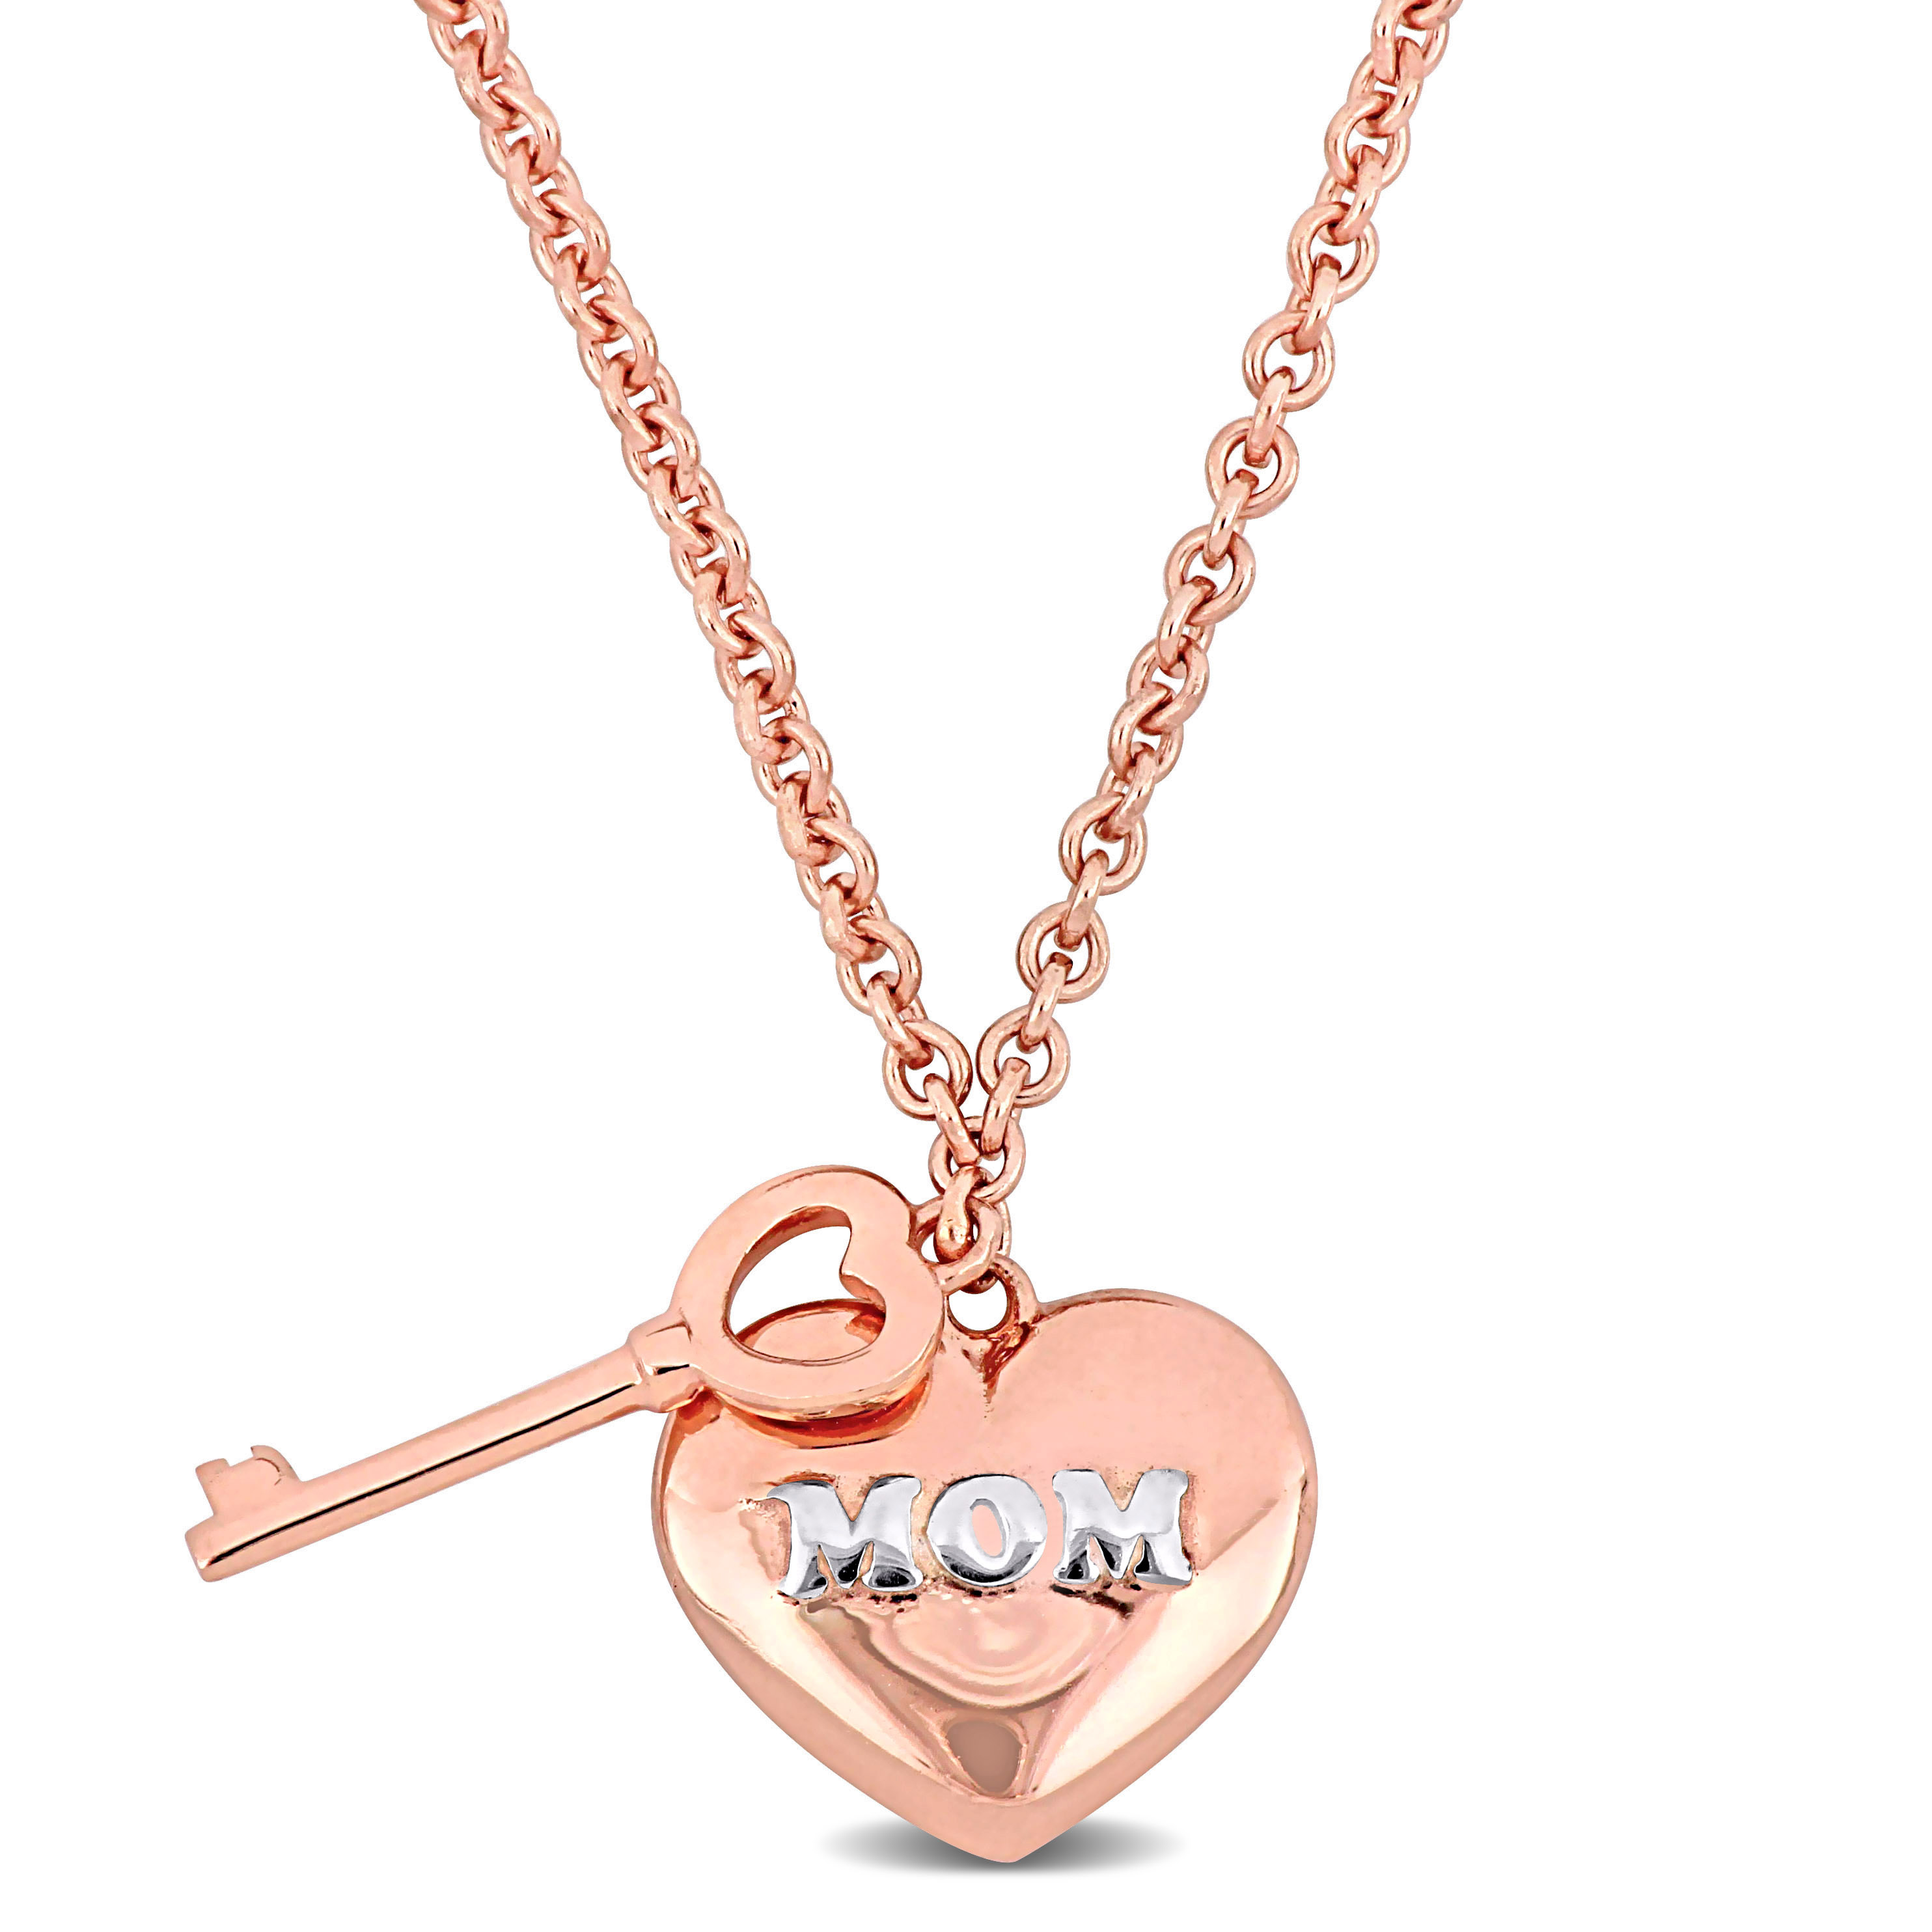 Heart and Key Charm Love Mom Necklace in Rose Silver w/ 18k White Gold Plating Sterling Silver - 16 + 2 in ext.